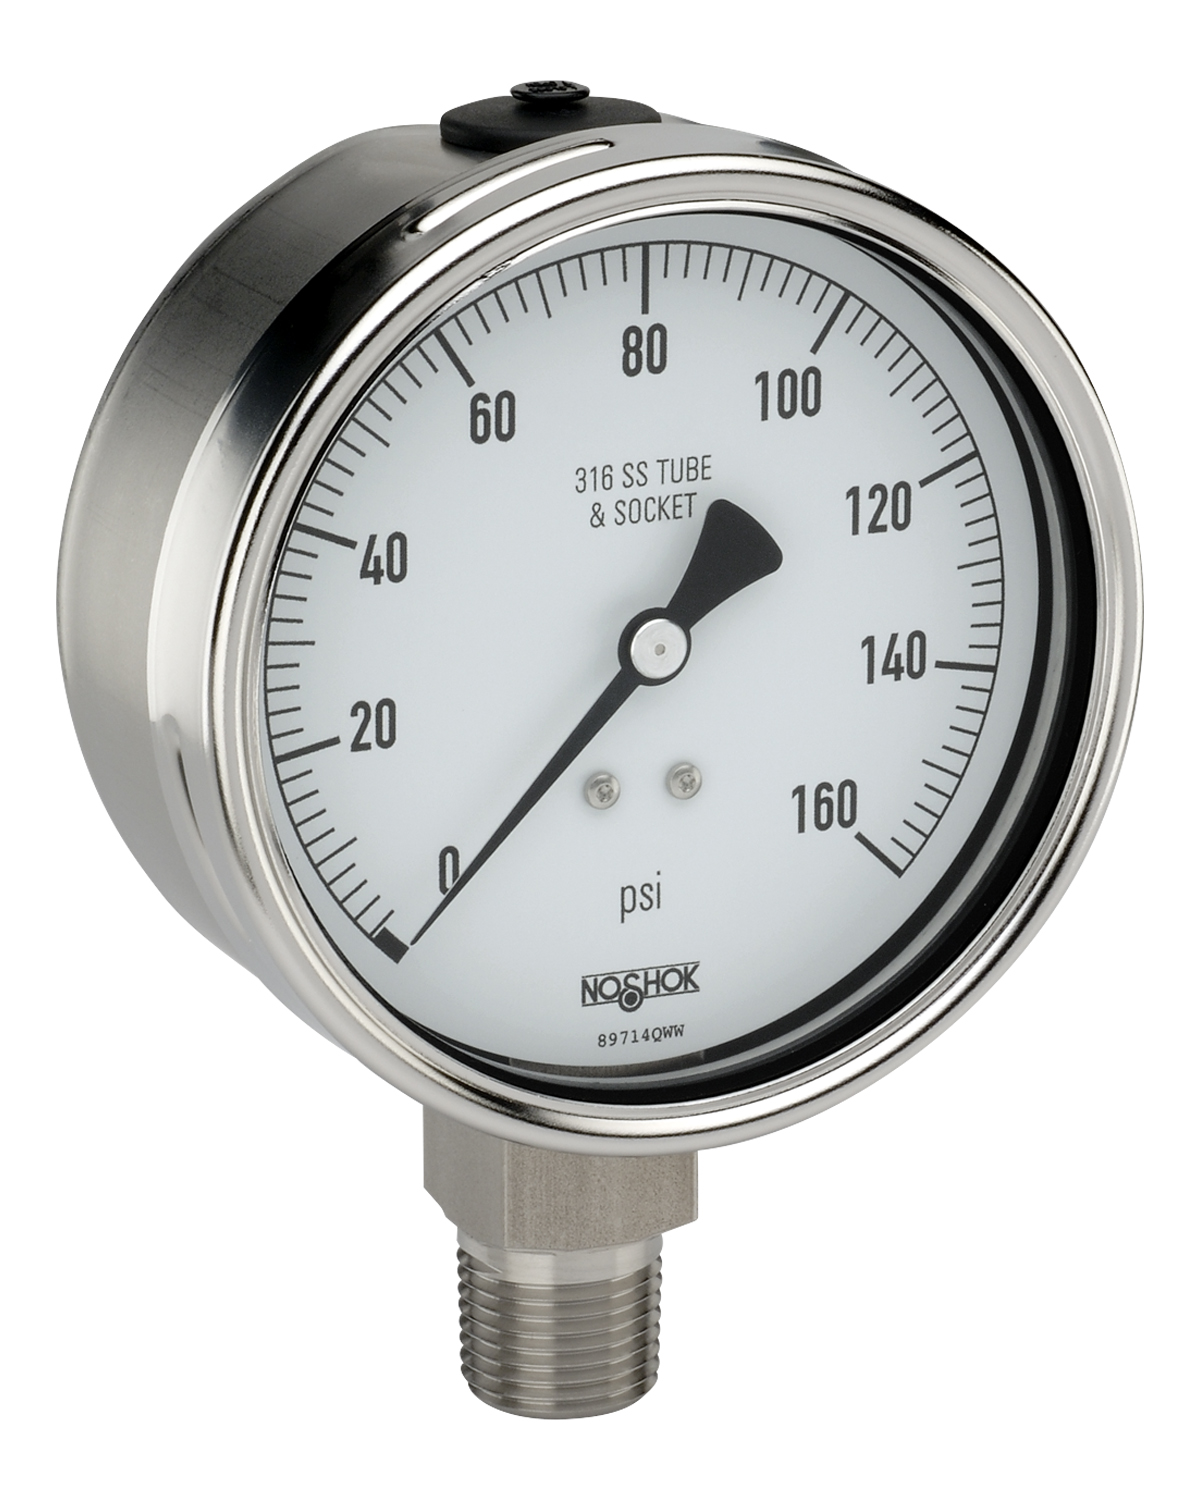 40-500-2000-psi/bar-1/4 400/500 Series All Stainless Steel Dry and Liquid Filled Pressure Gauges